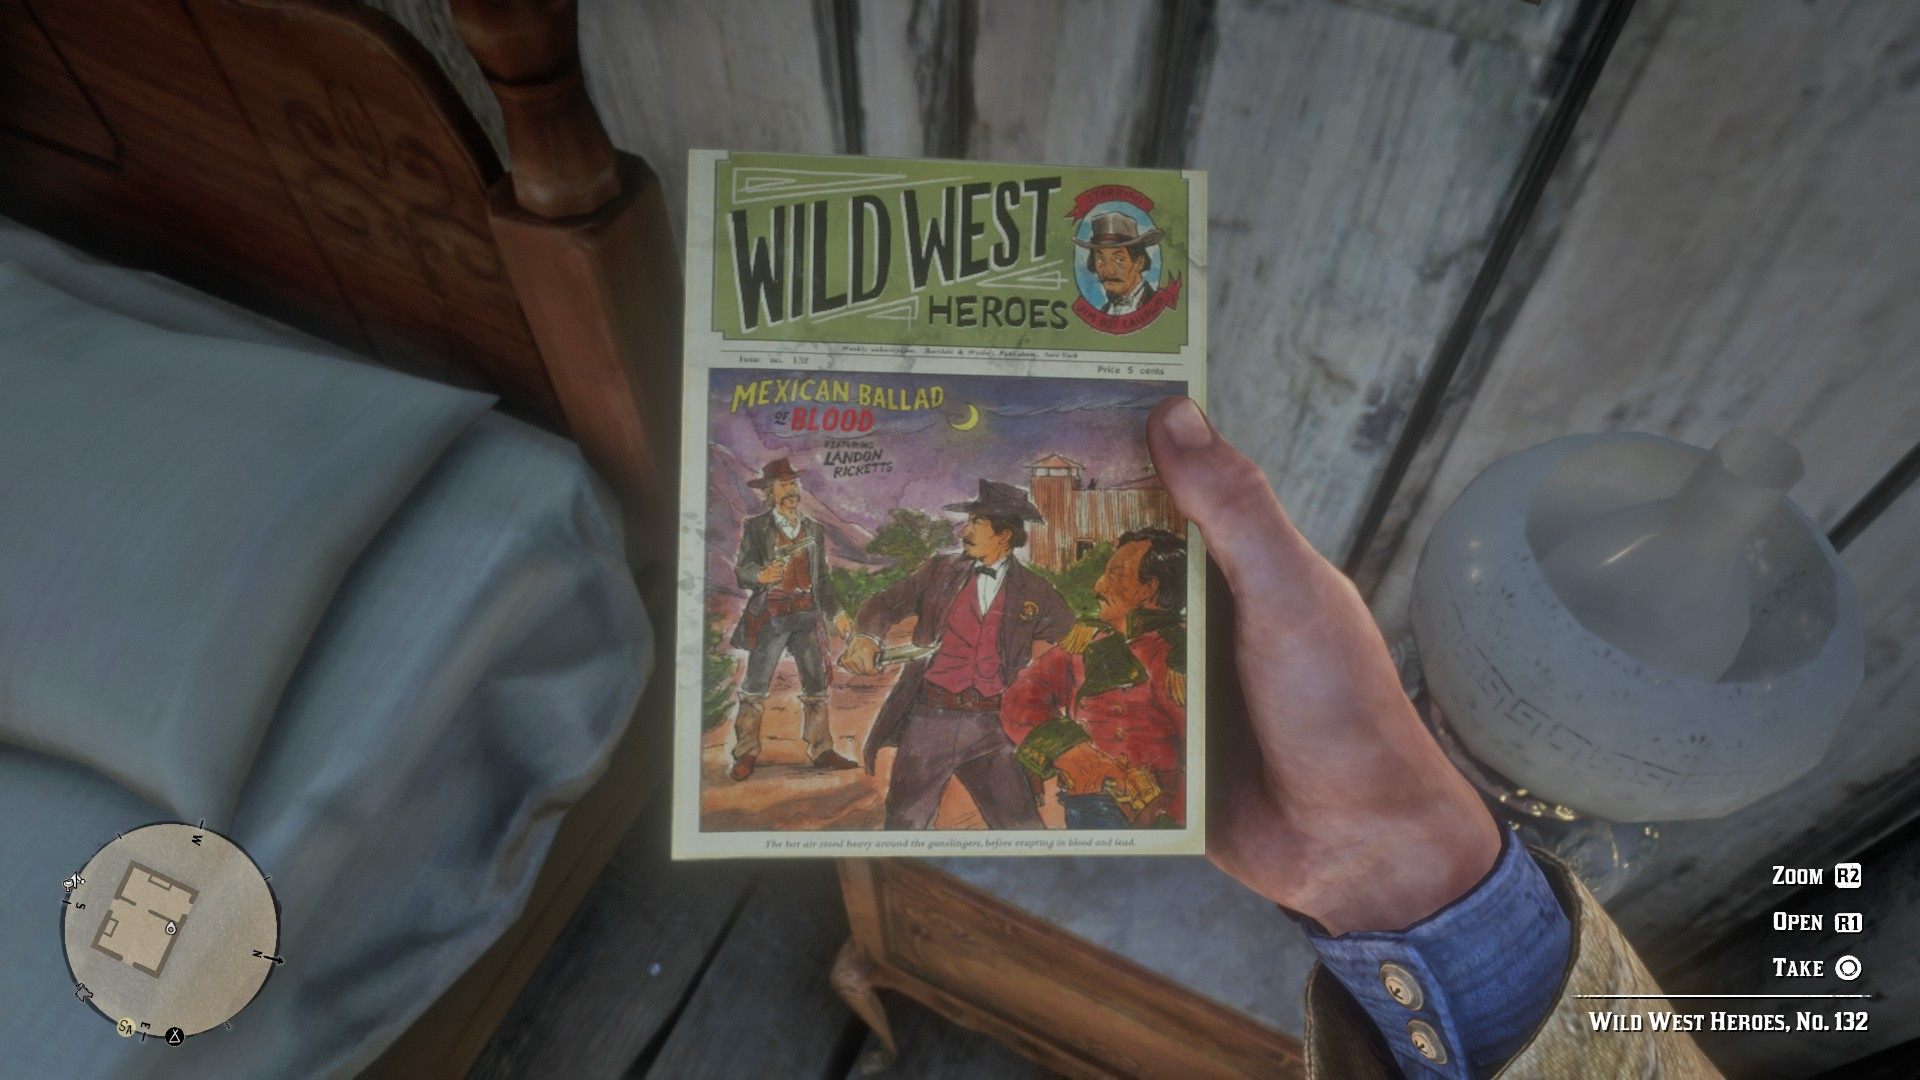 Screenshot of Red Dead book - via https://guides4gamers.com/red-dead-redemption-2/poi/item-requests/